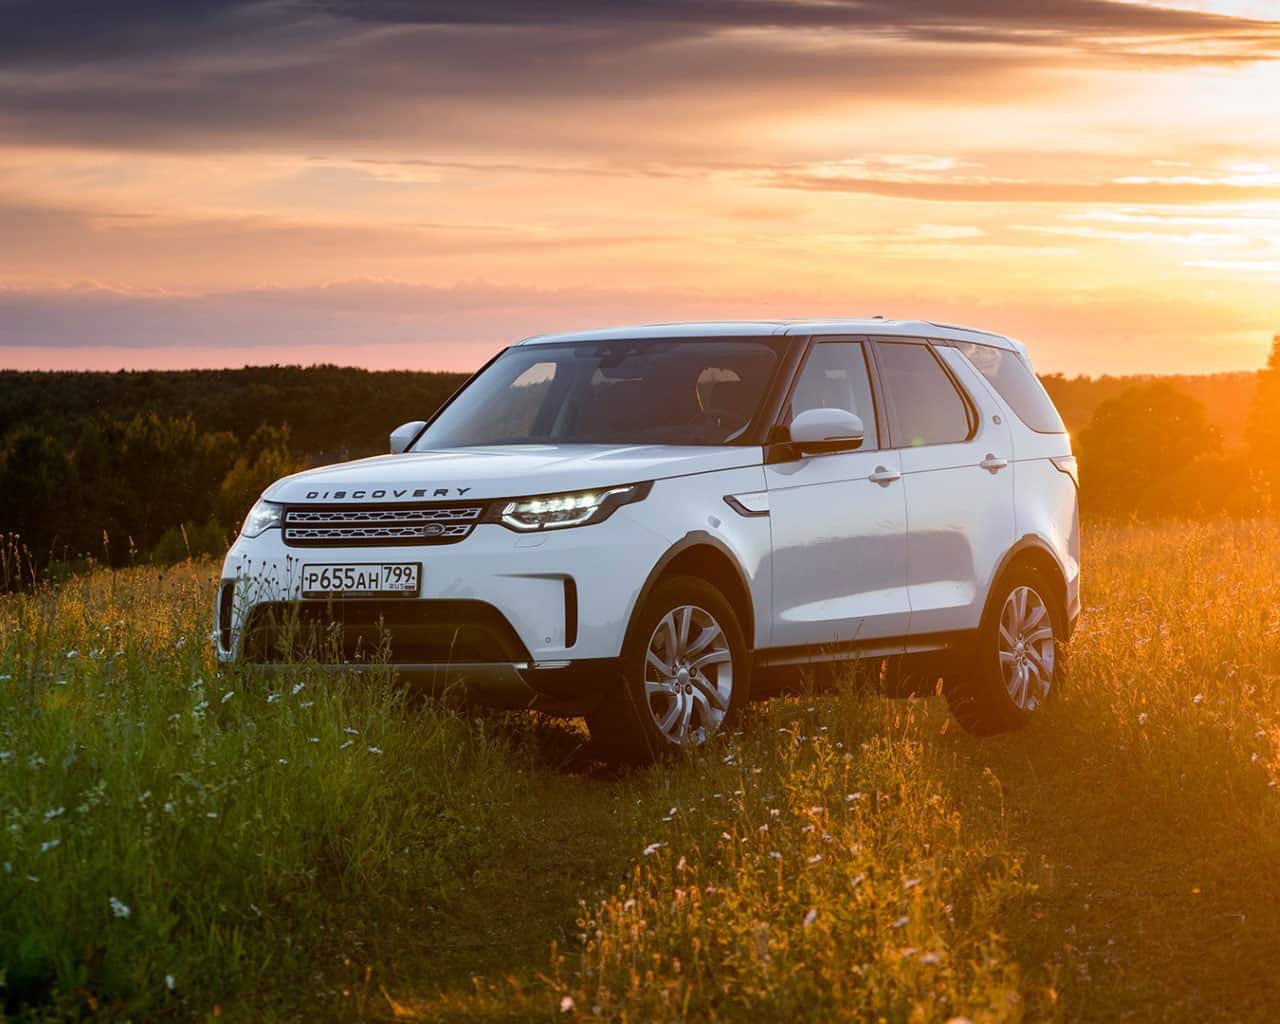 Model Year 2019 Land Rover Discovery in India